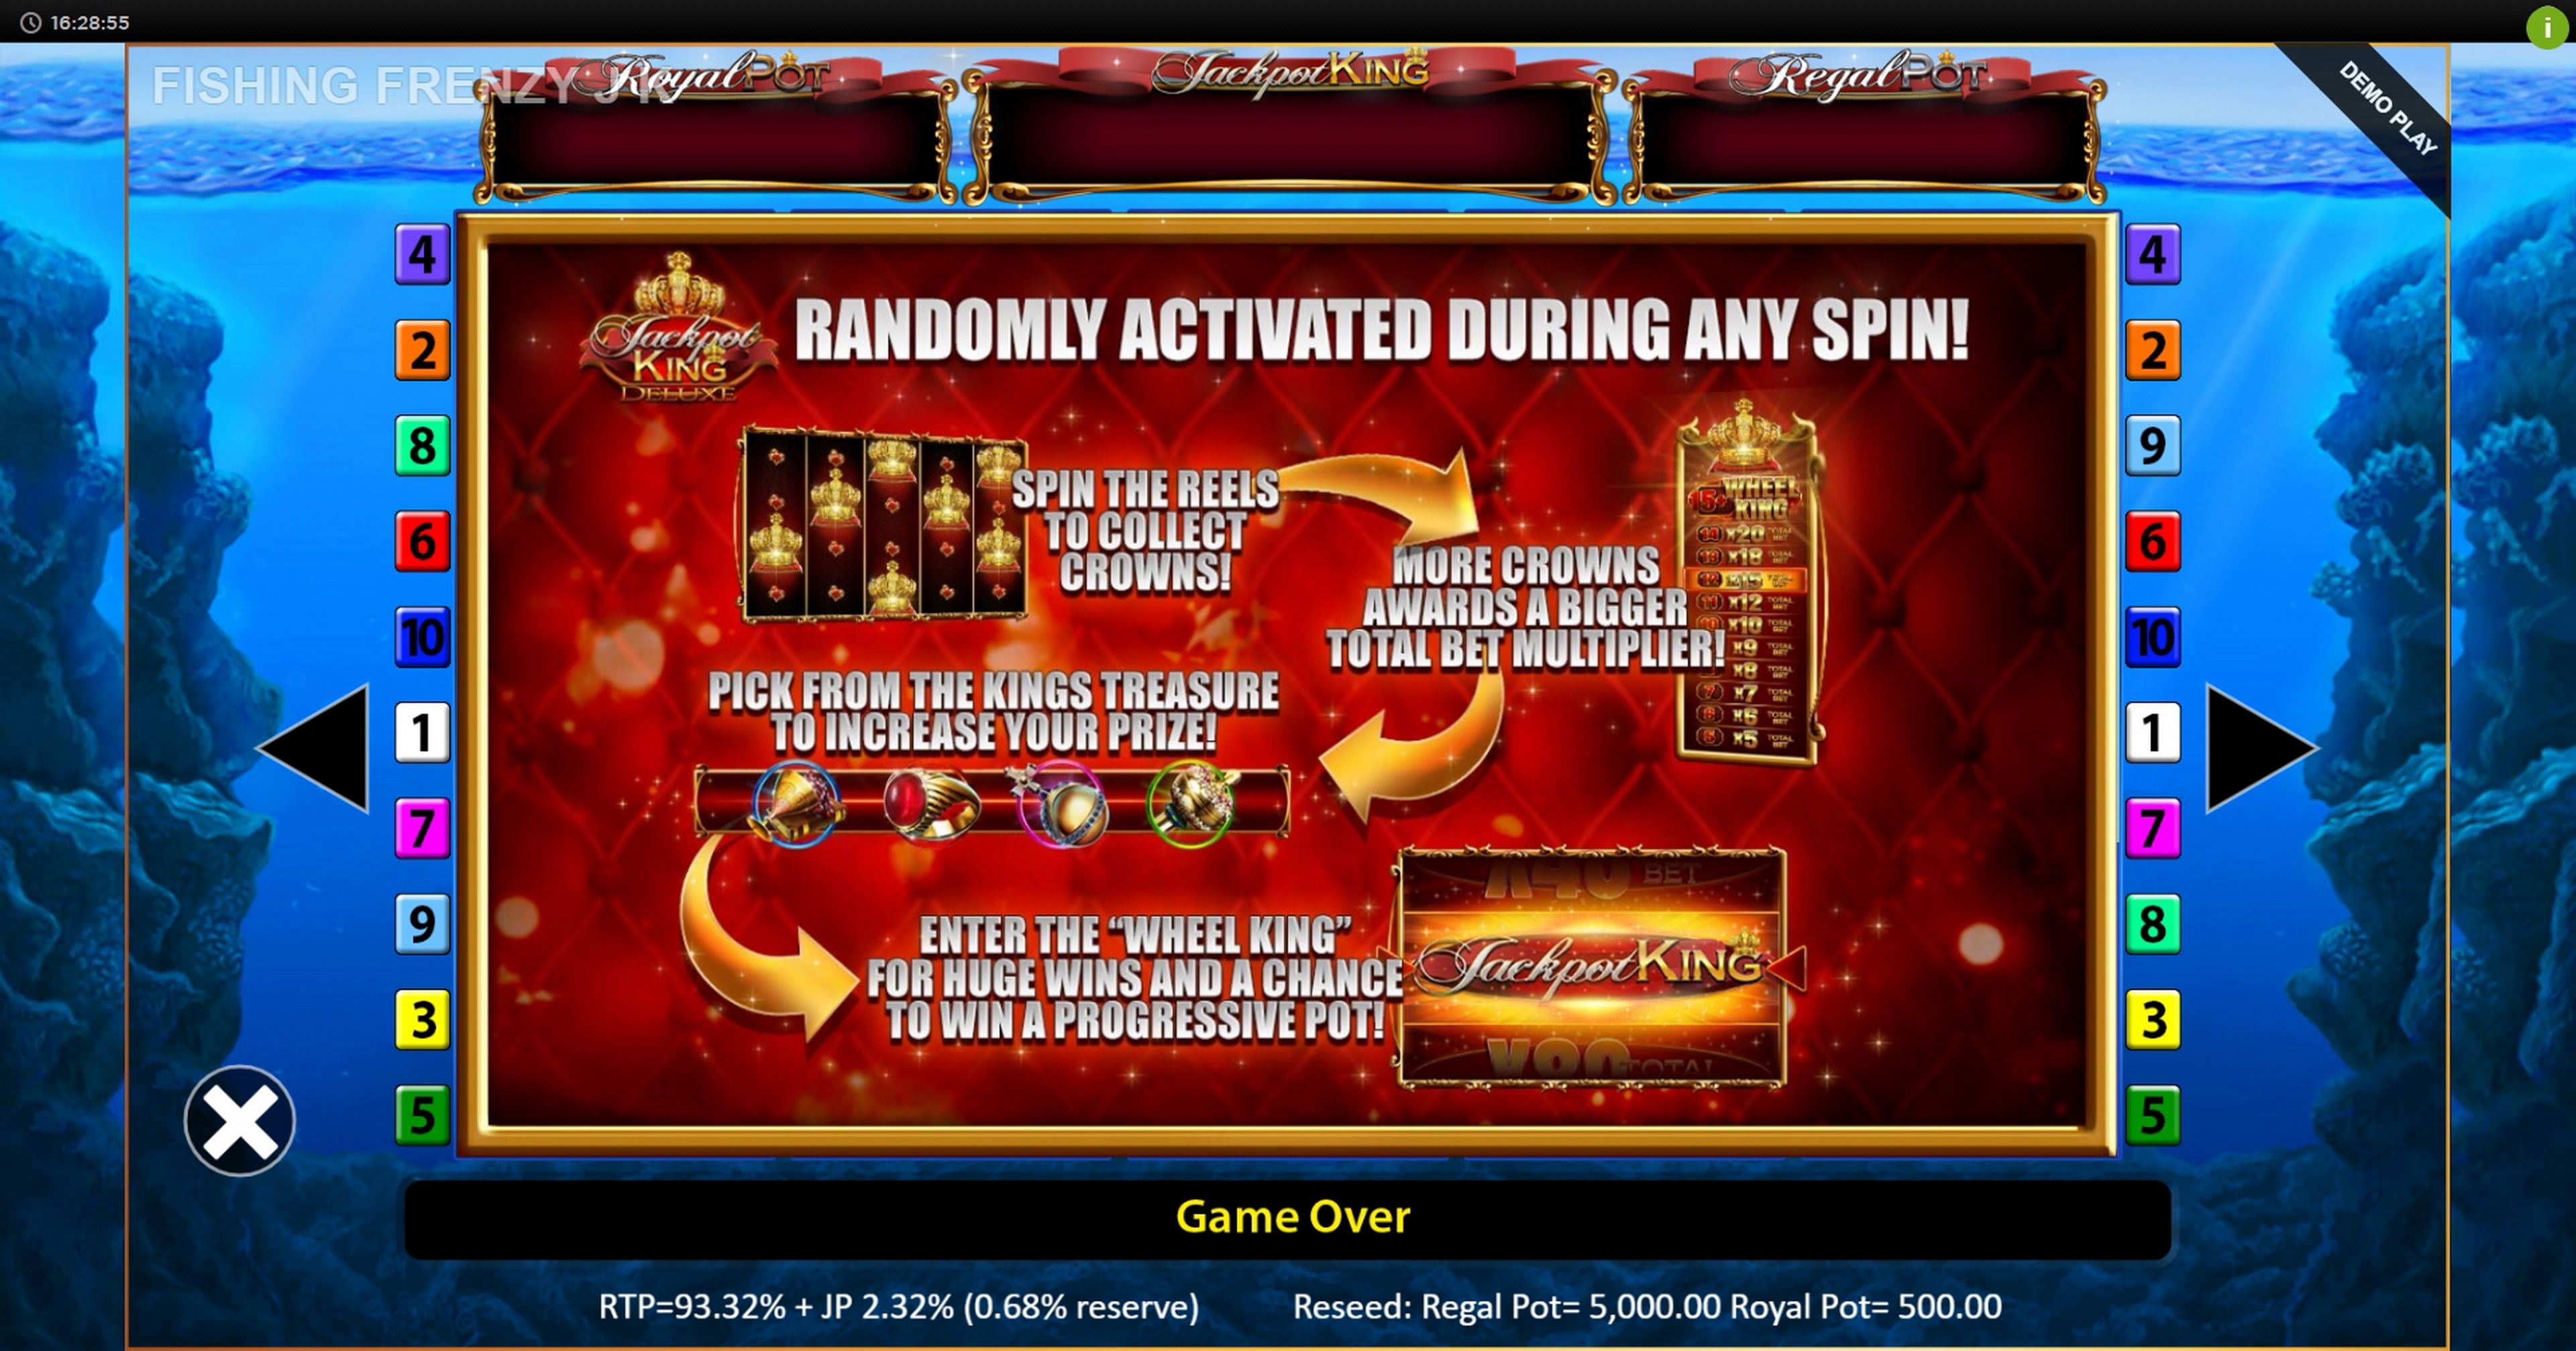 Info of Fishin Frenzy Jackpot King Slot Game by Blueprint Gaming